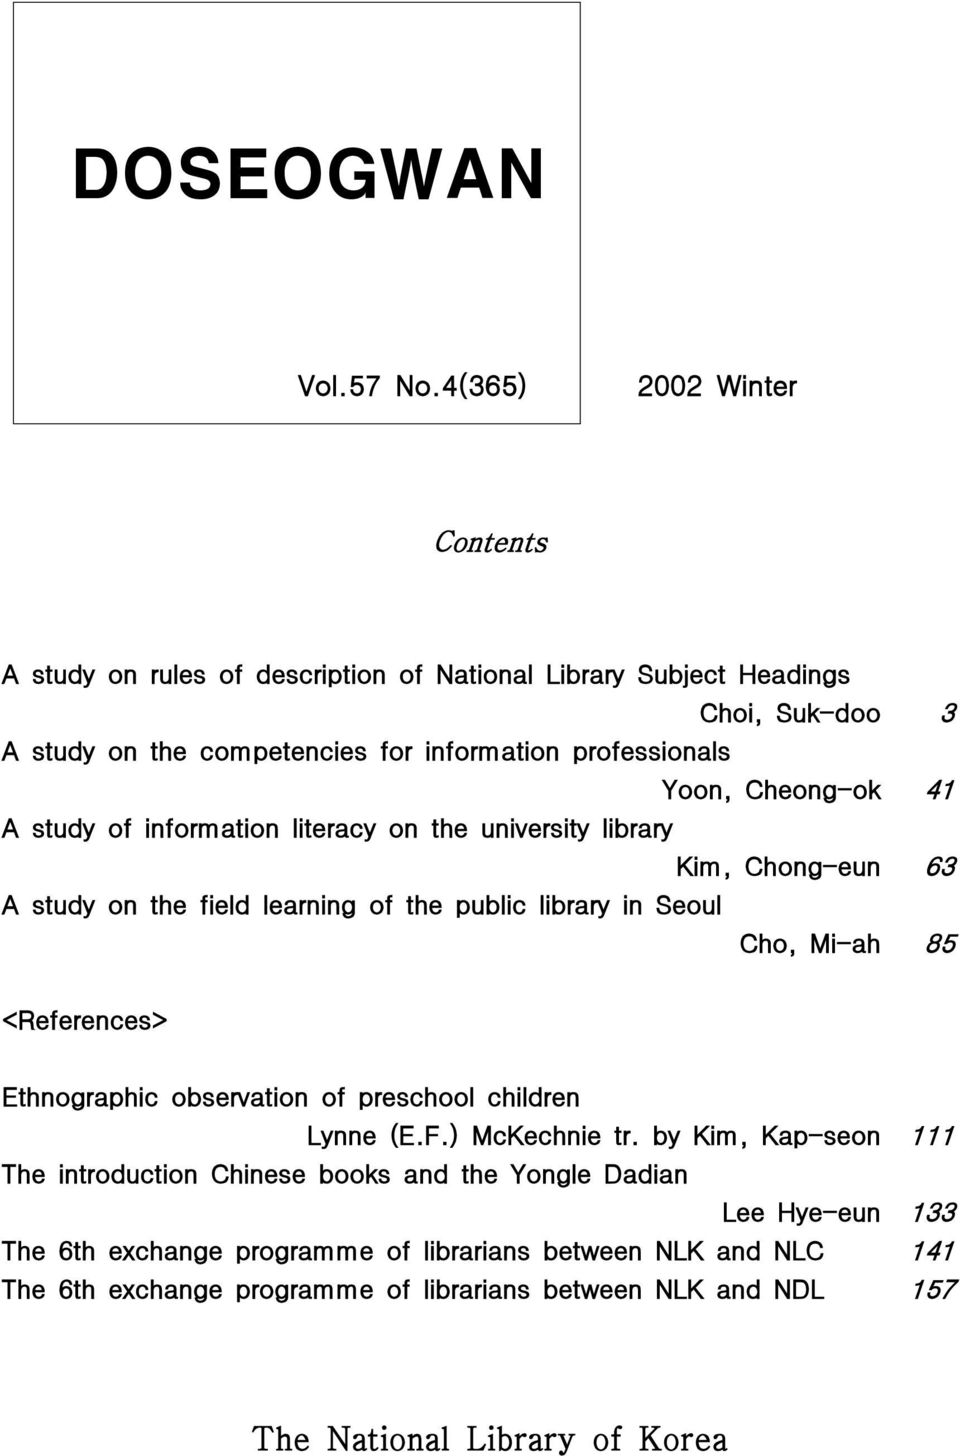 Cheong-ok A study of information literacy on the university library Kim, Chong-eun A study on the field learning of the public library in Seoul Cho, Mi-ah 3 41 63 85